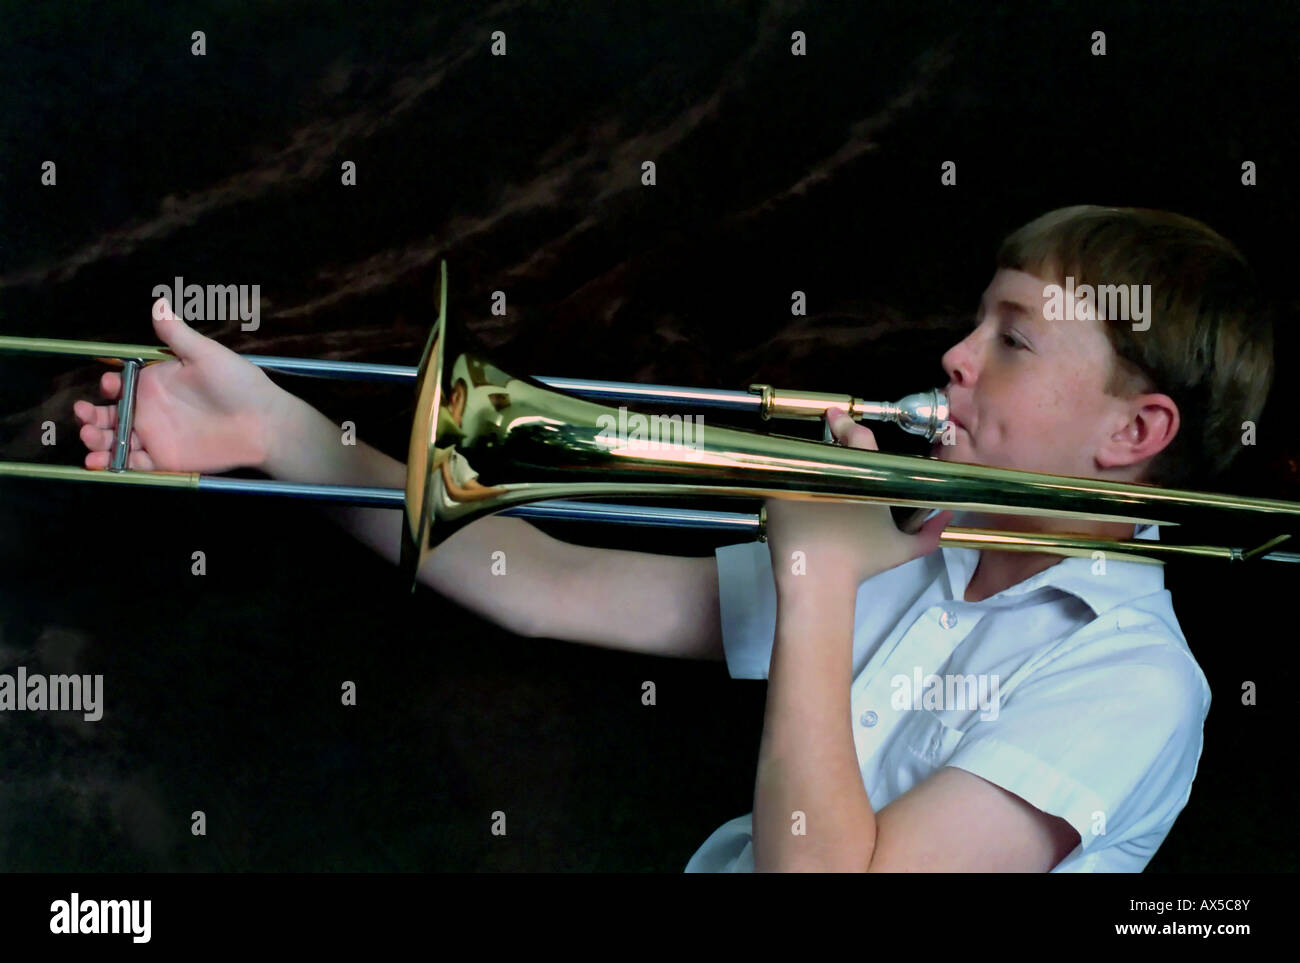 An 11 year old boy playing, or trying to play, the trombone. The musical instrument is almost bigger than he is. Stock Photo